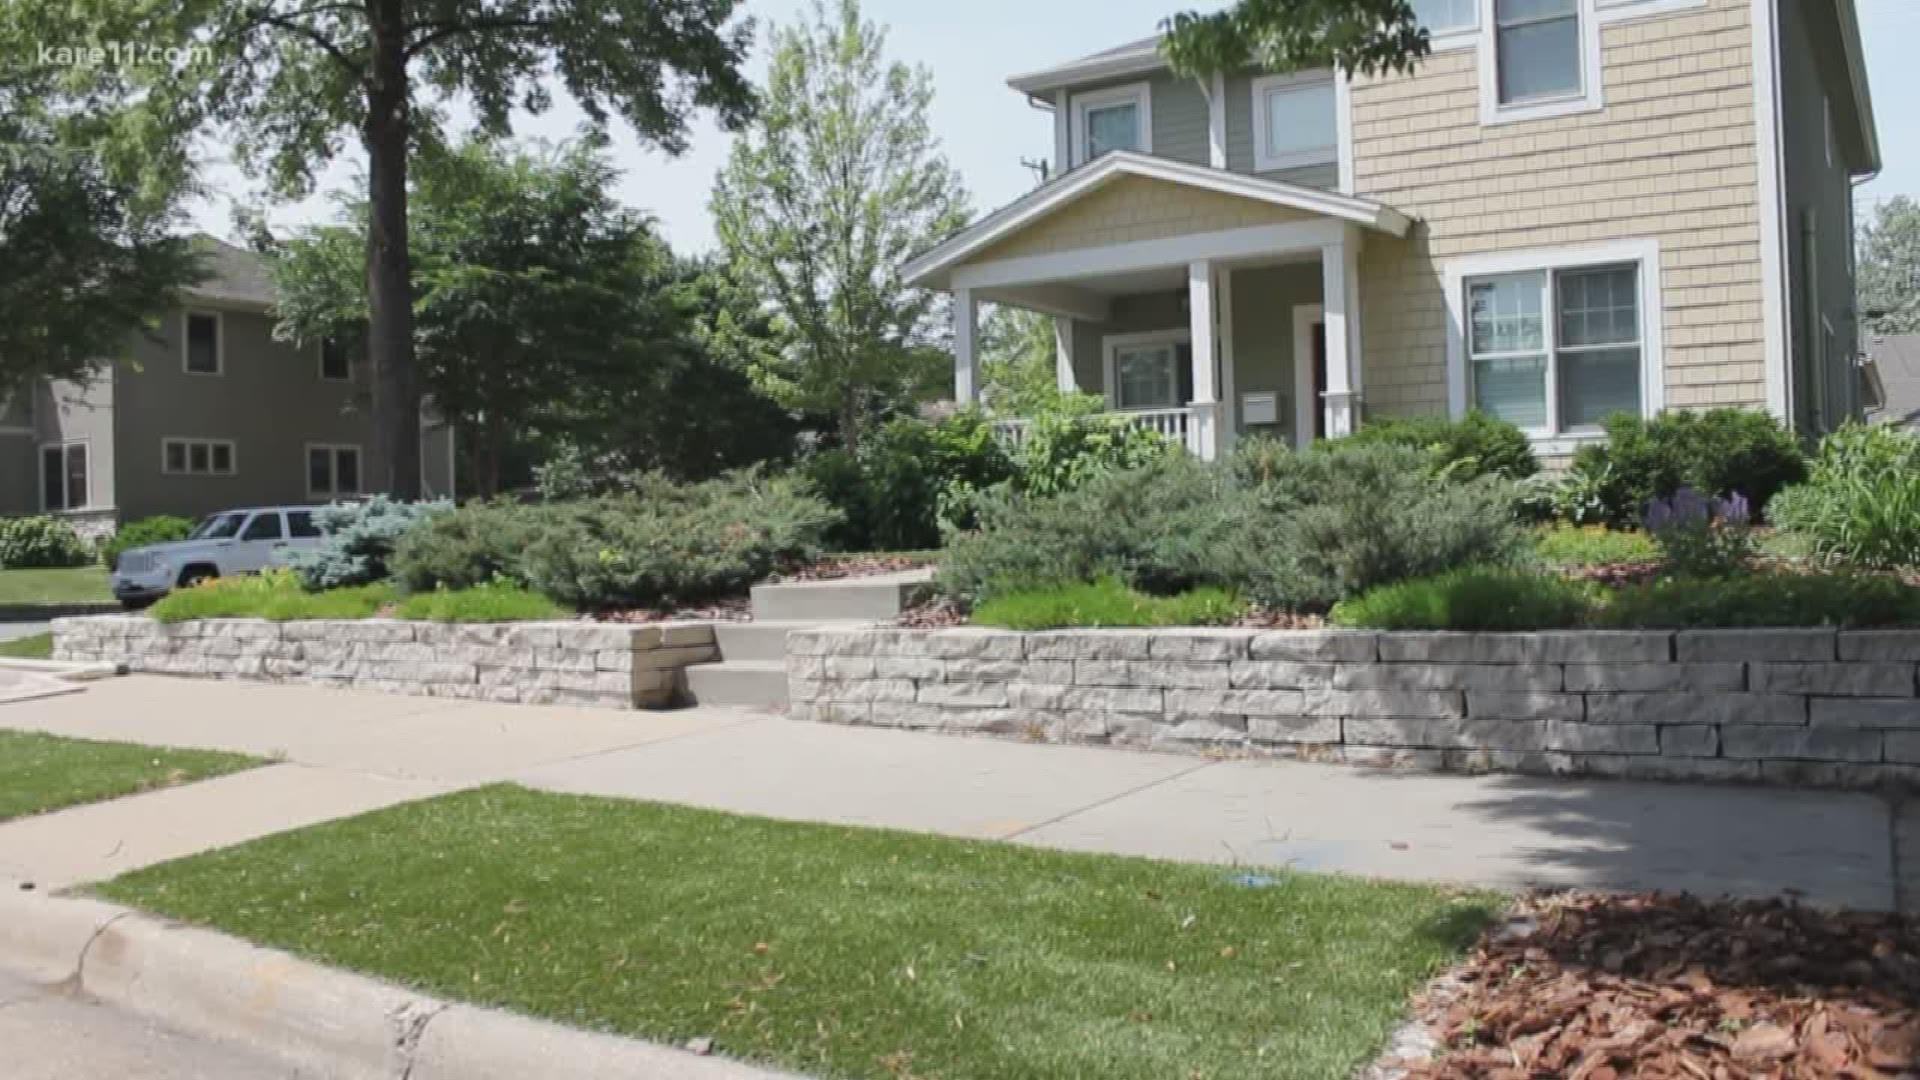 Mpls. man replaces grass with artificial turf